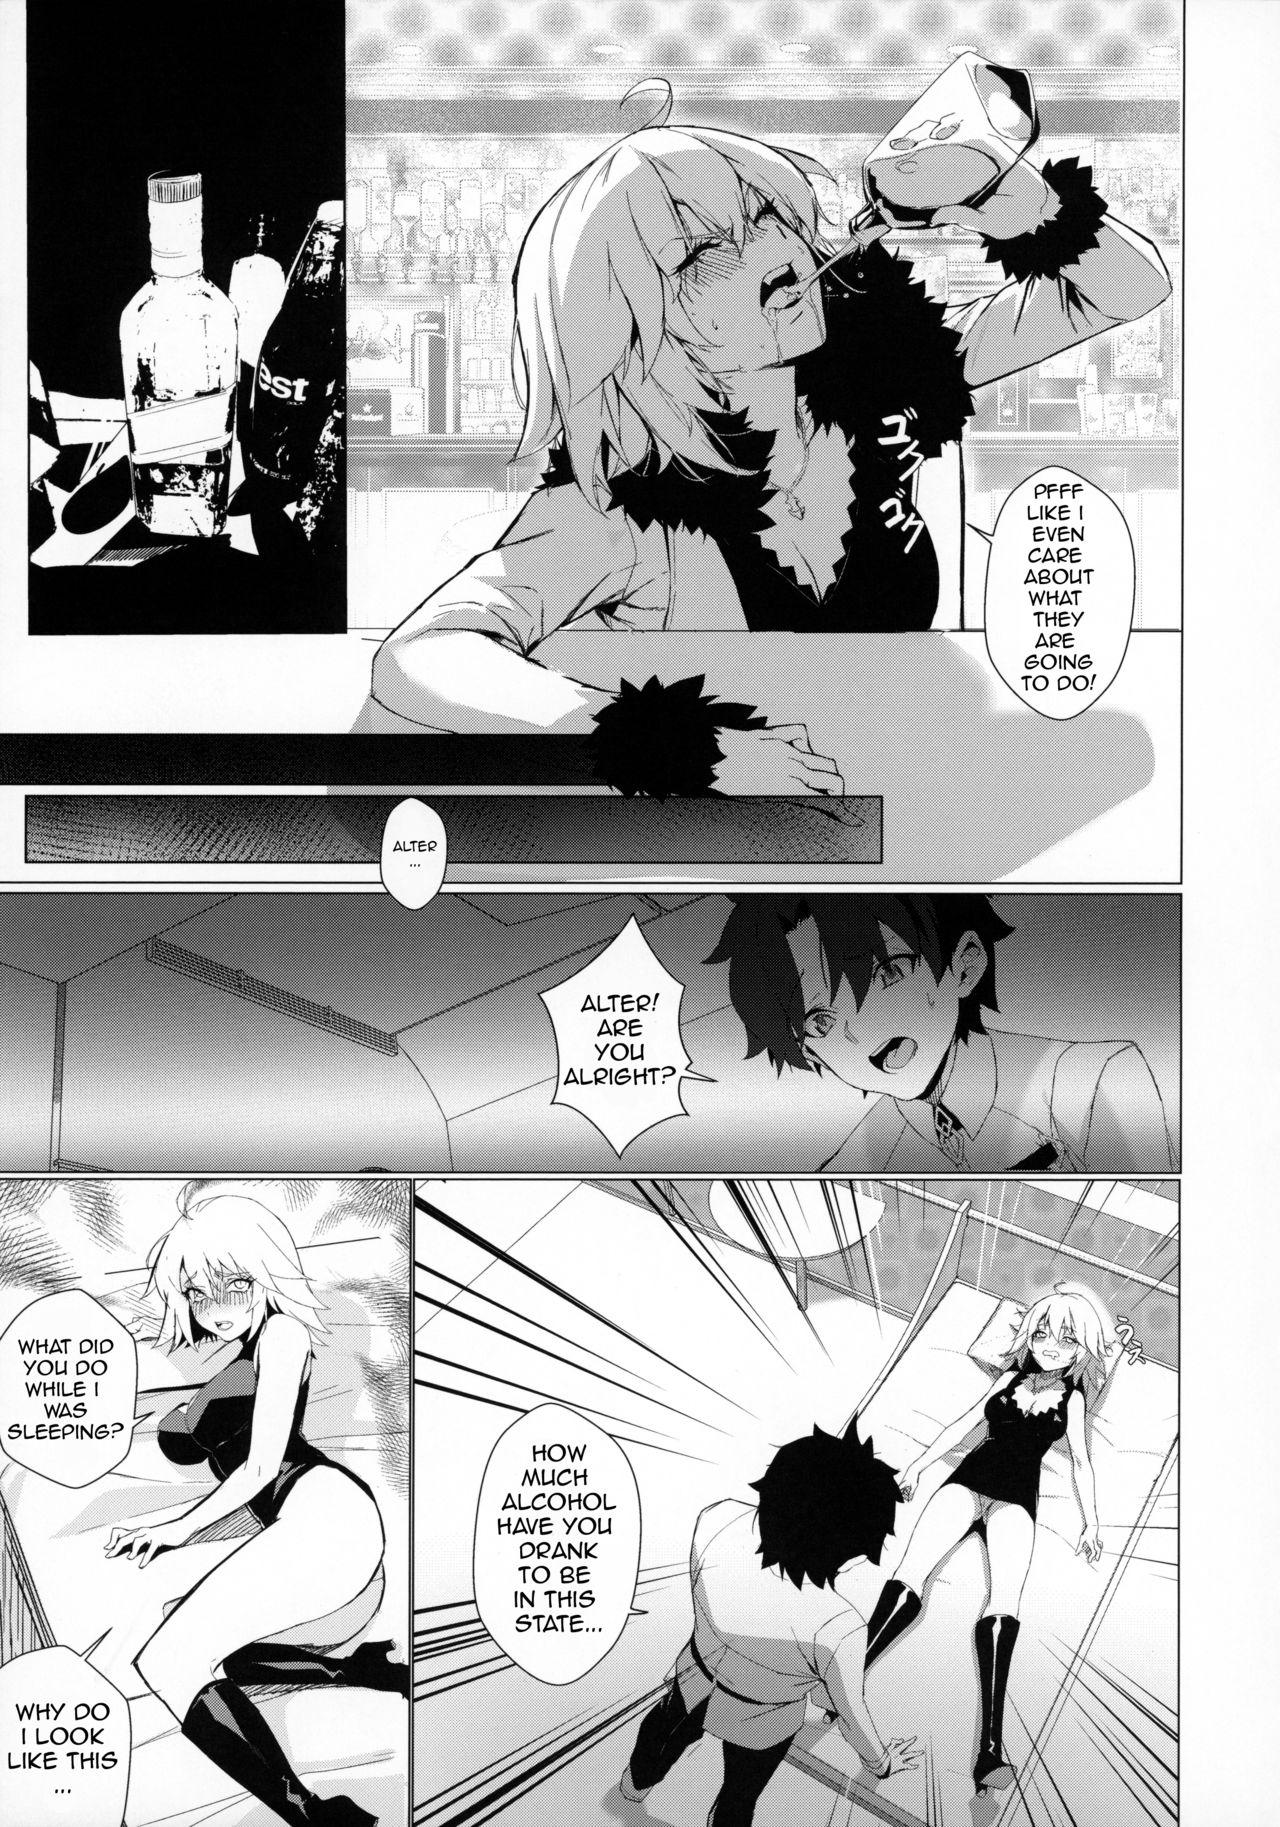 Trimmed PERROS - Fate grand order Pissing - Page 4